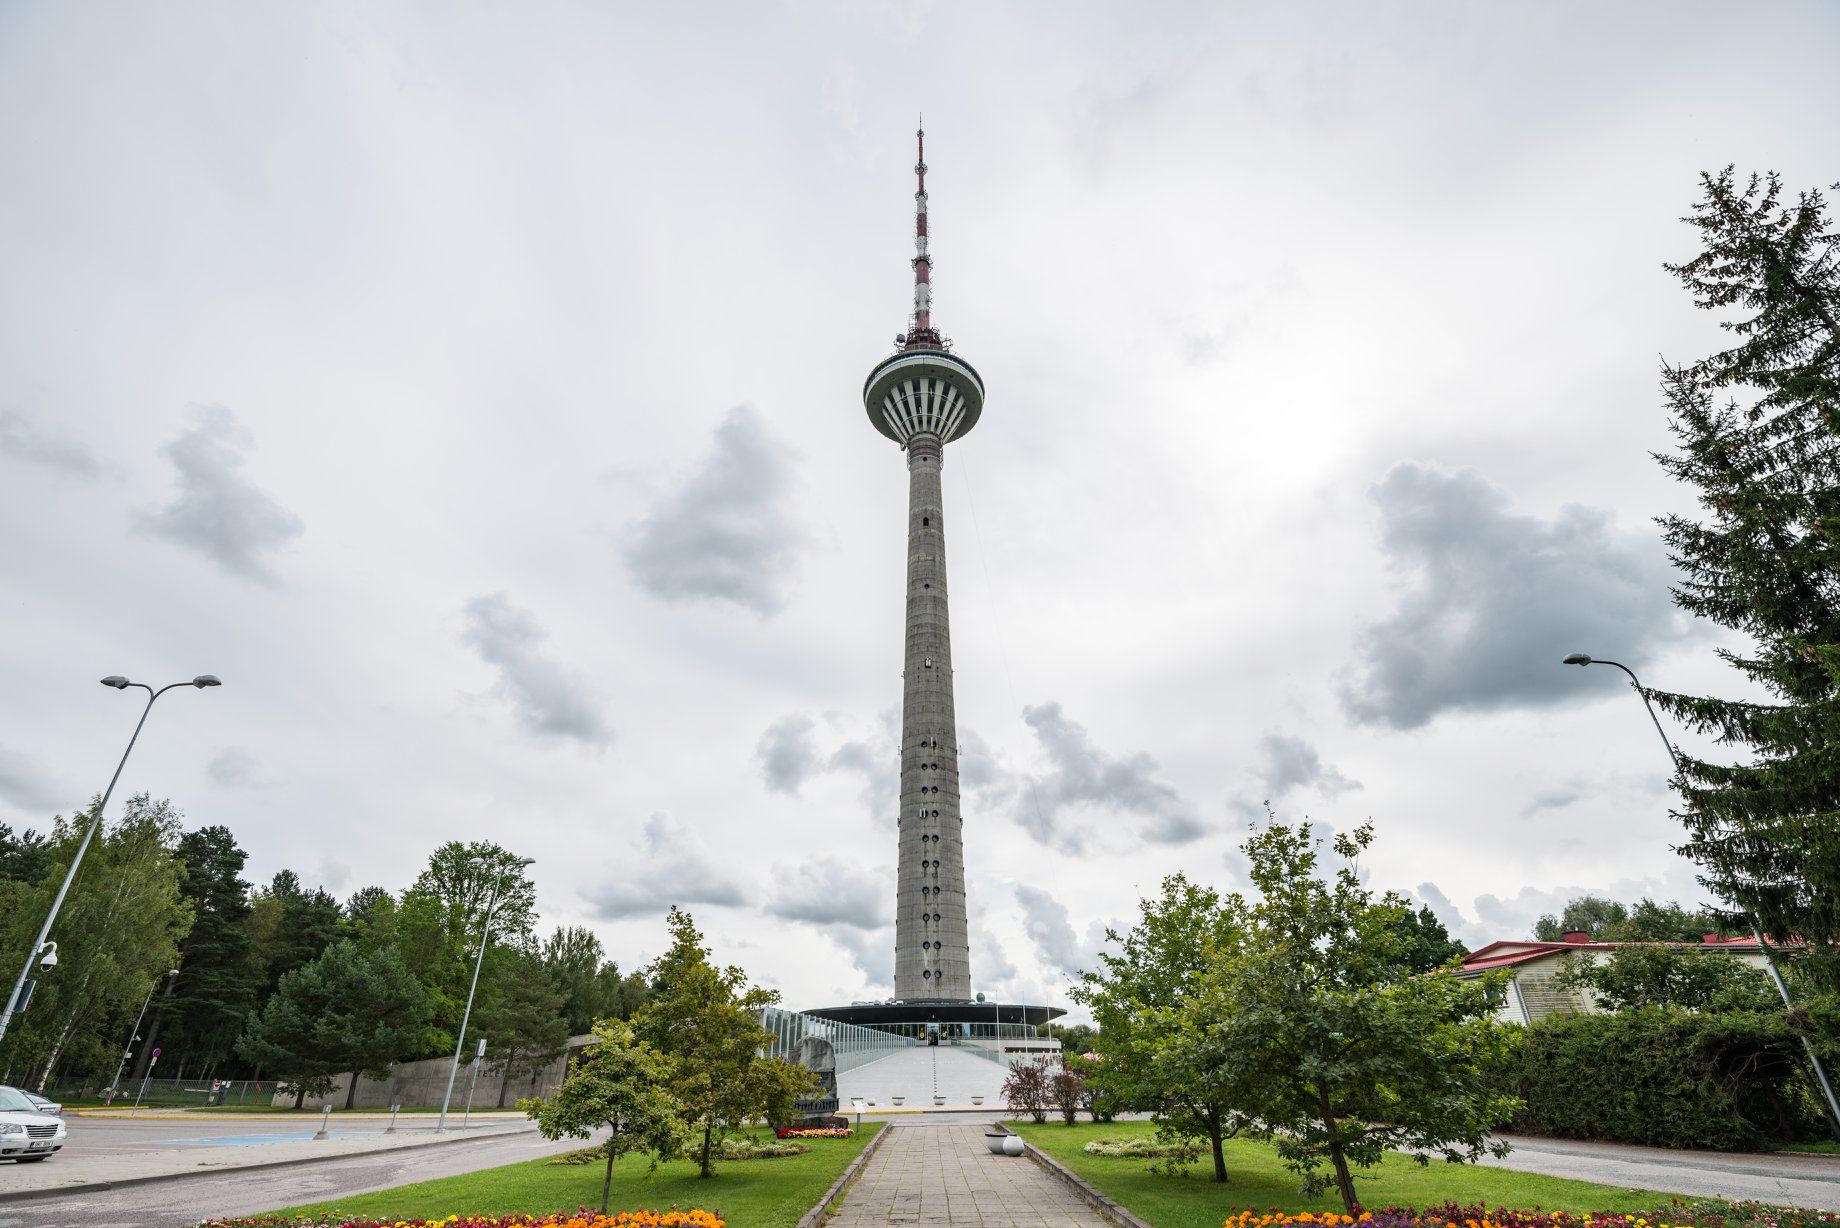 The Tallinn TV tower. Photo courtesy the TV tower Facebook page.